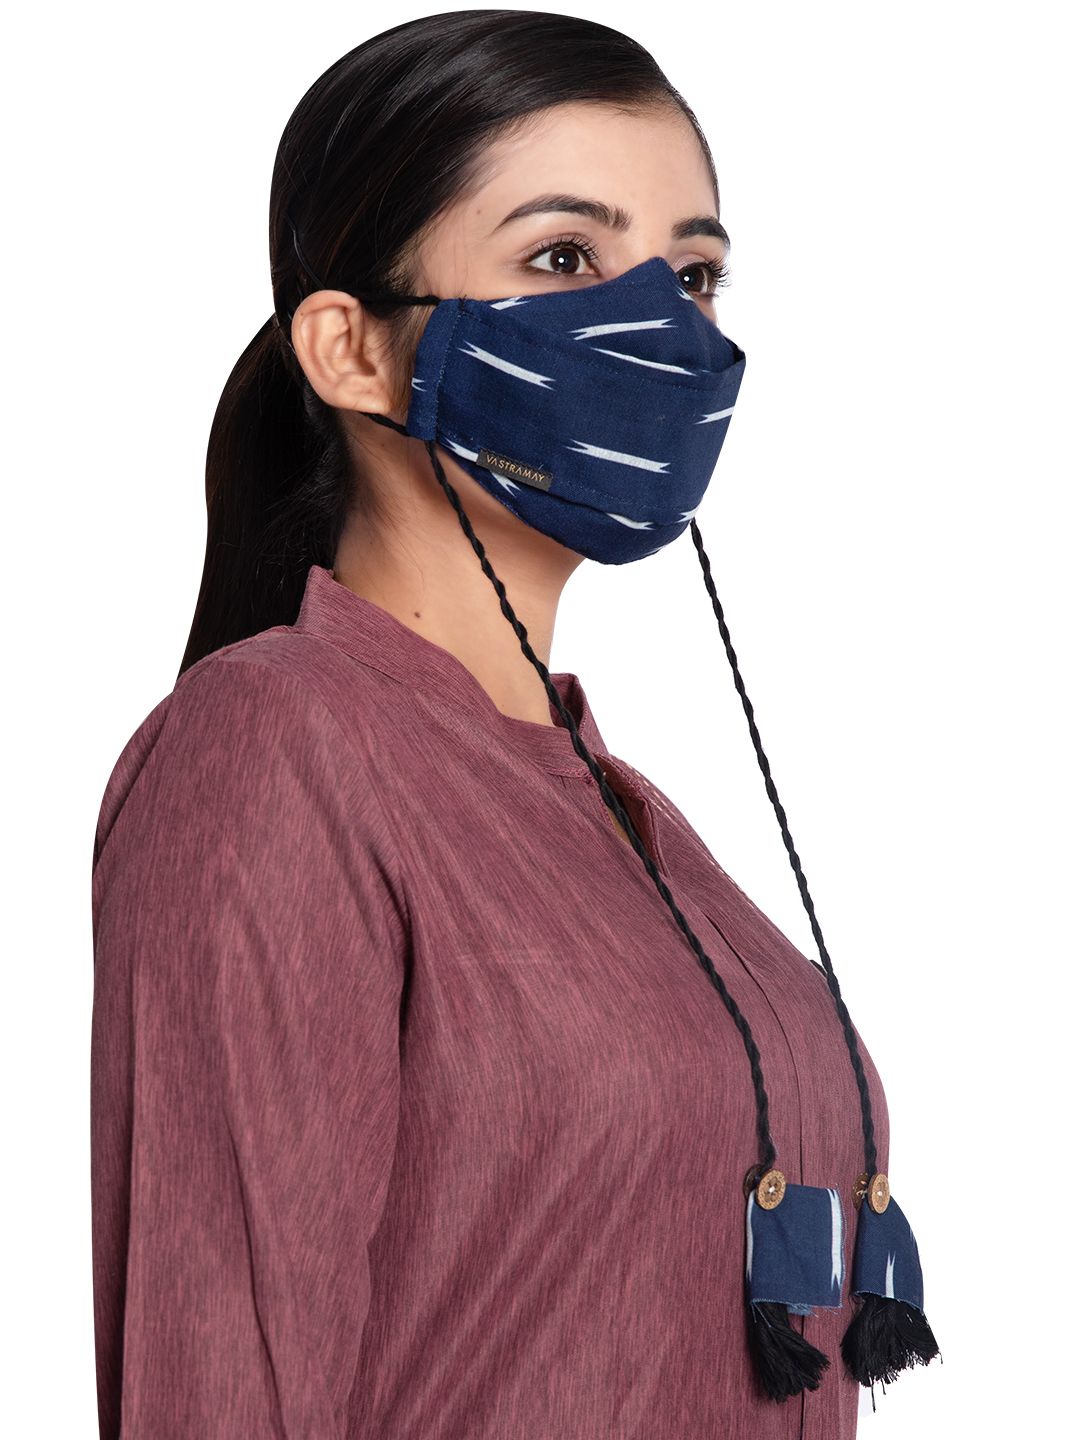 VASTRAMAY Adults Blue Ikkat Printed 3-Ply Reusable Cloth Mask Price in India